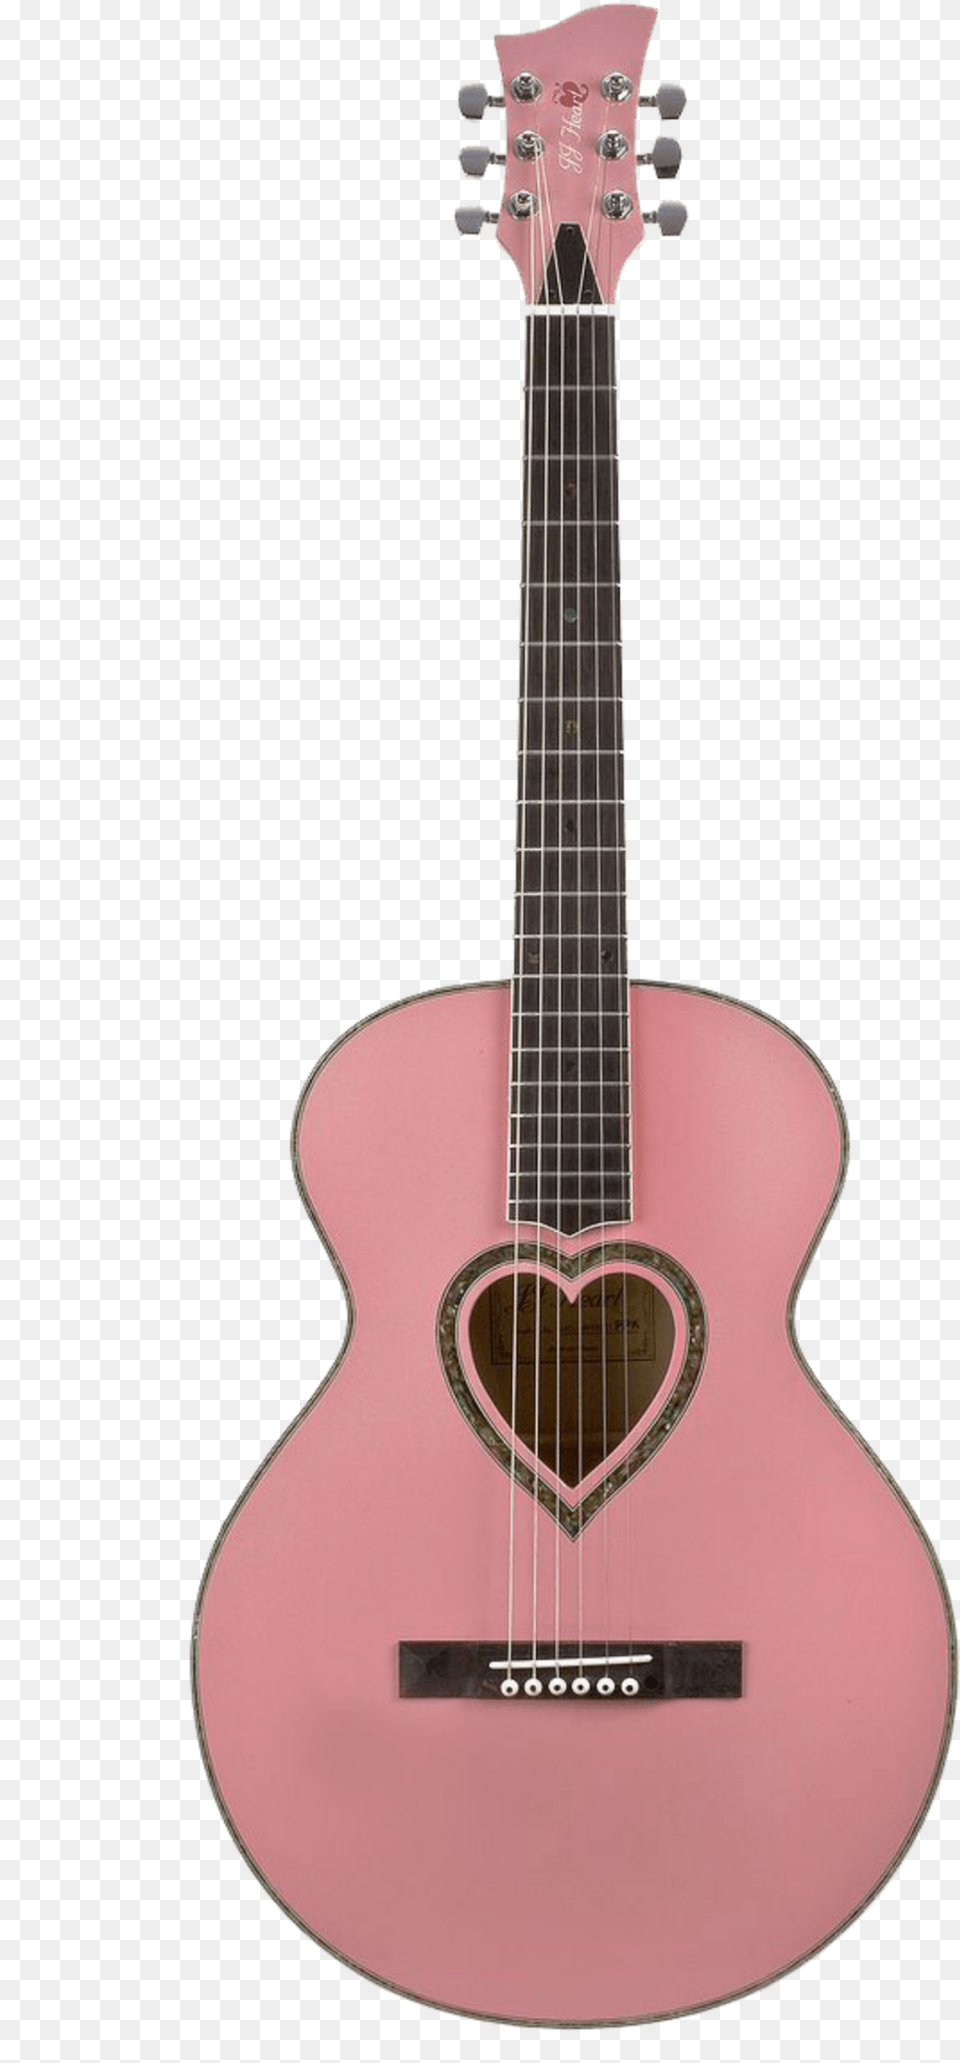 The Most Edited Melody Picsart Pink Guitar Aesthetic, Musical Instrument, Bass Guitar Free Png